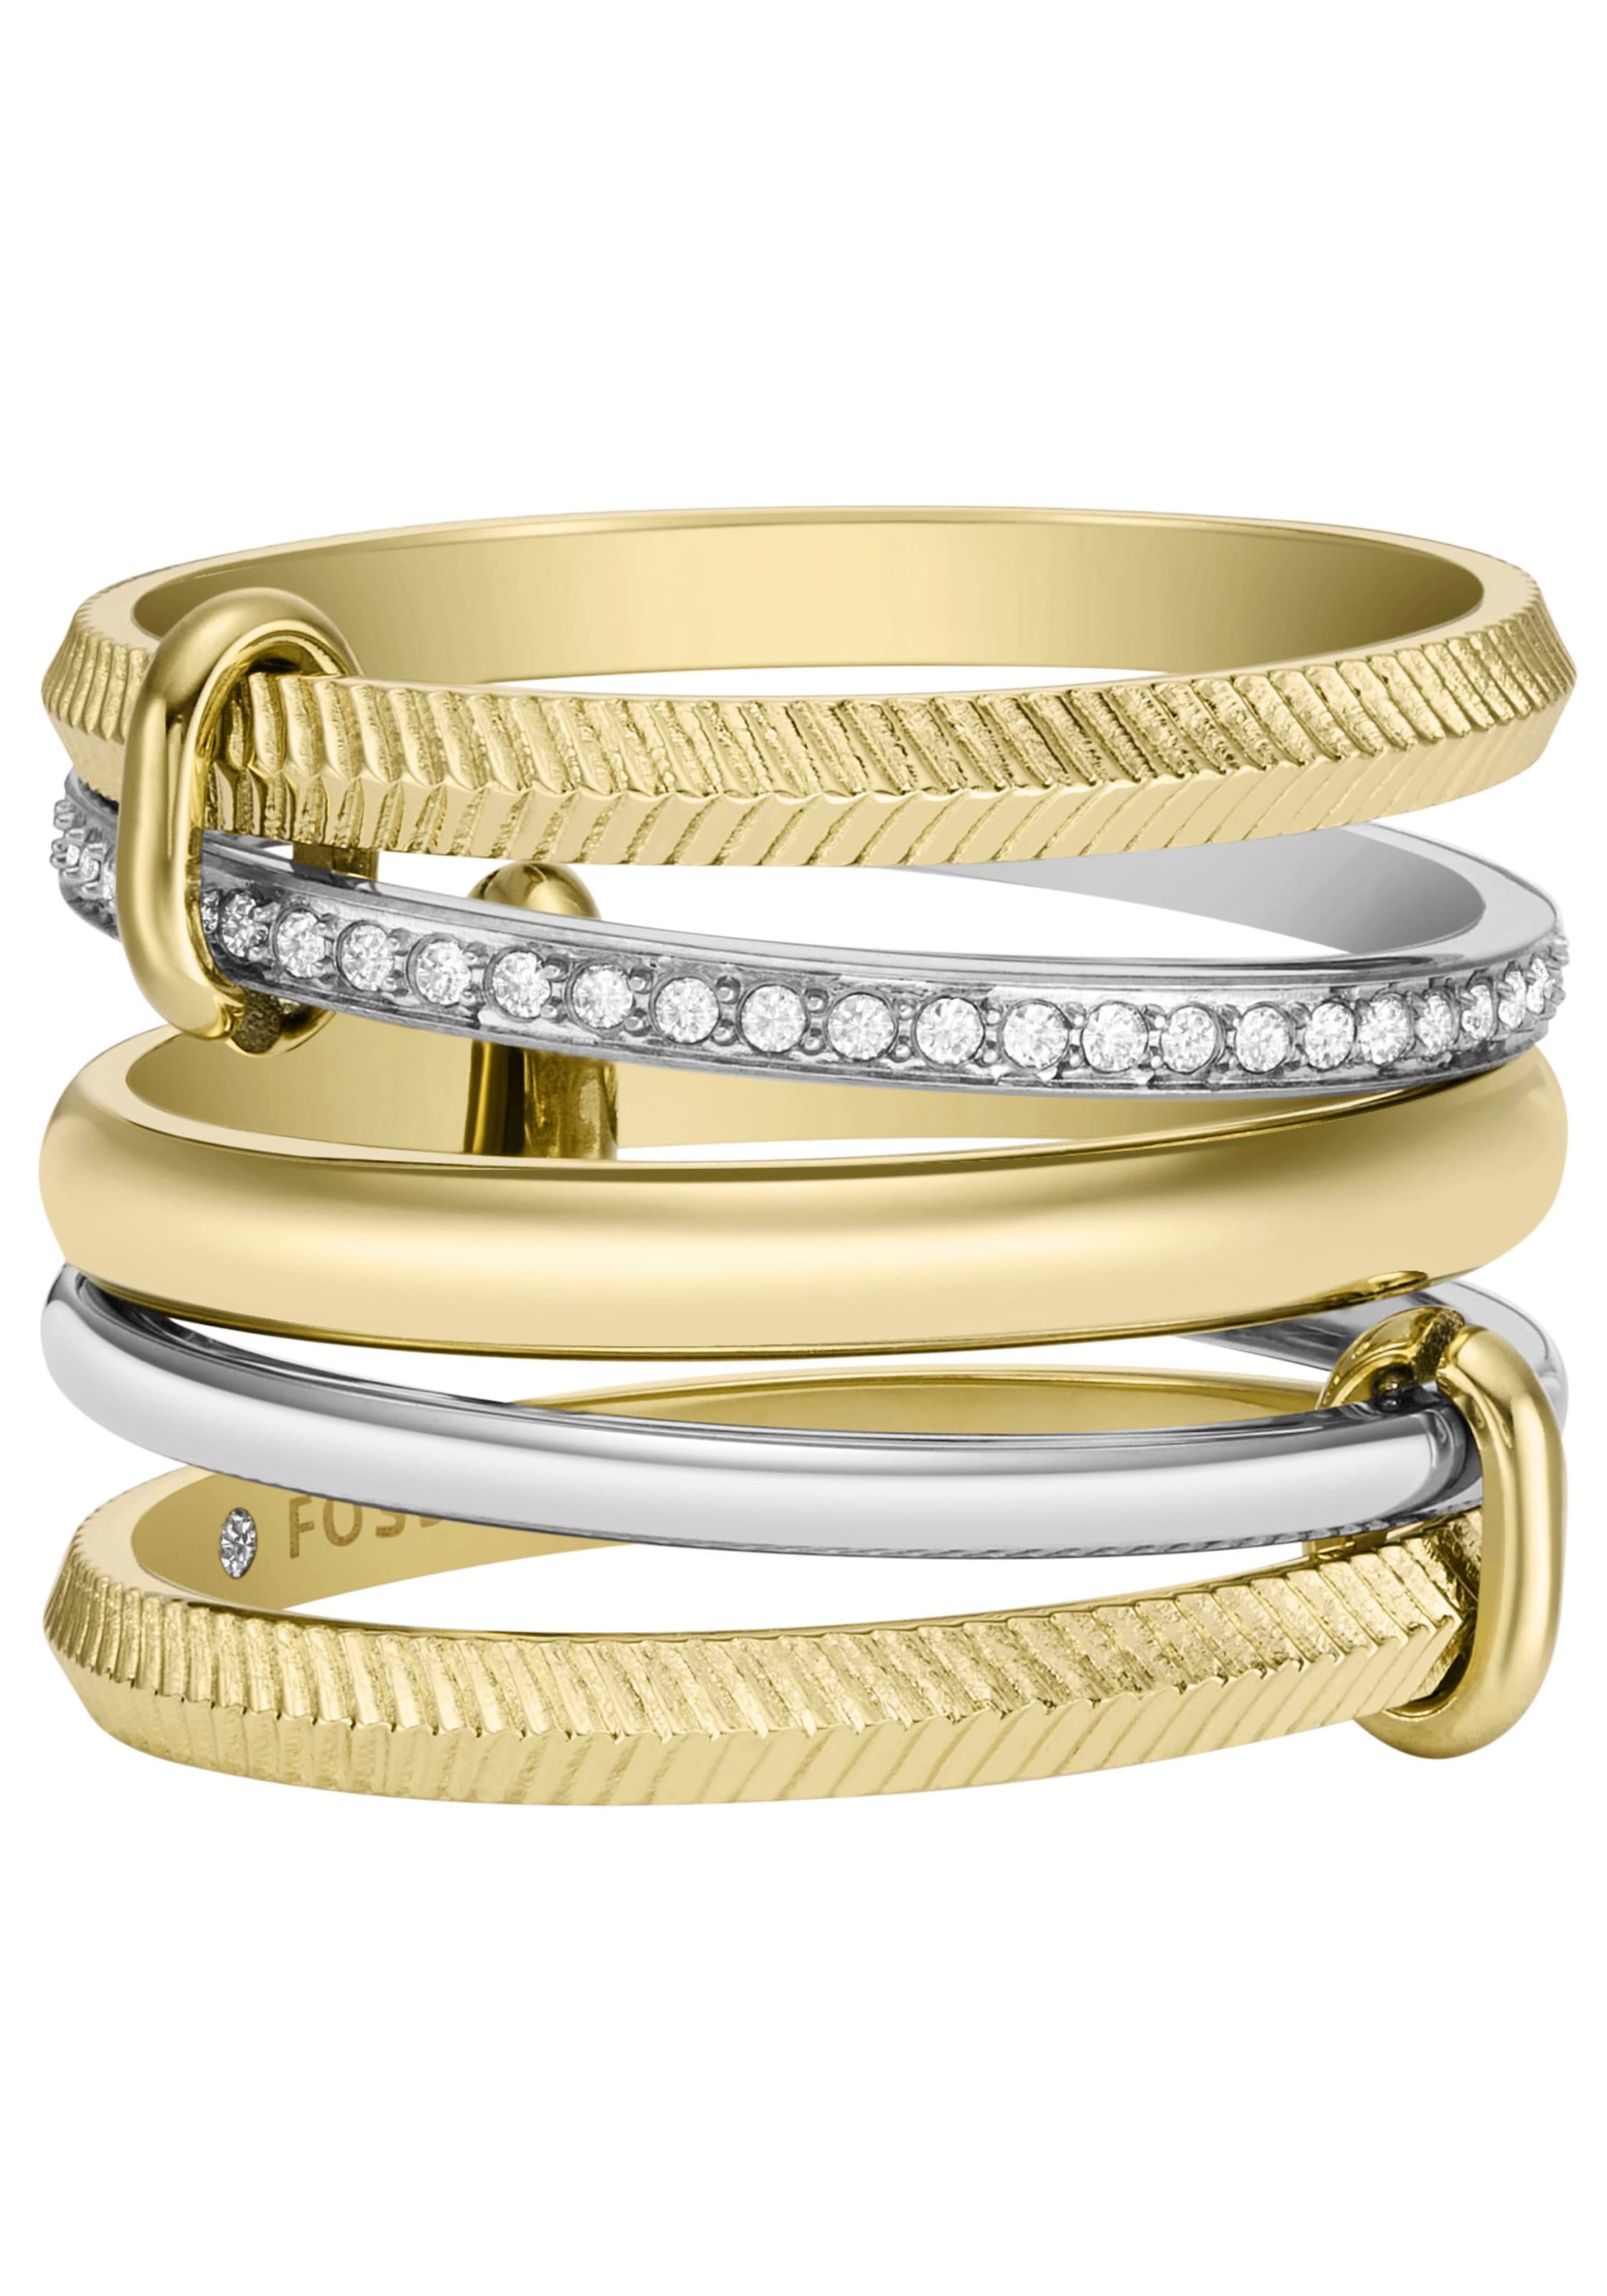 Glassteinen walking UP Fossil »JEWELRY I\'m RING, STACKED JF04592998«, PRESTACK TWO-TONE ALL Fingerring mit |